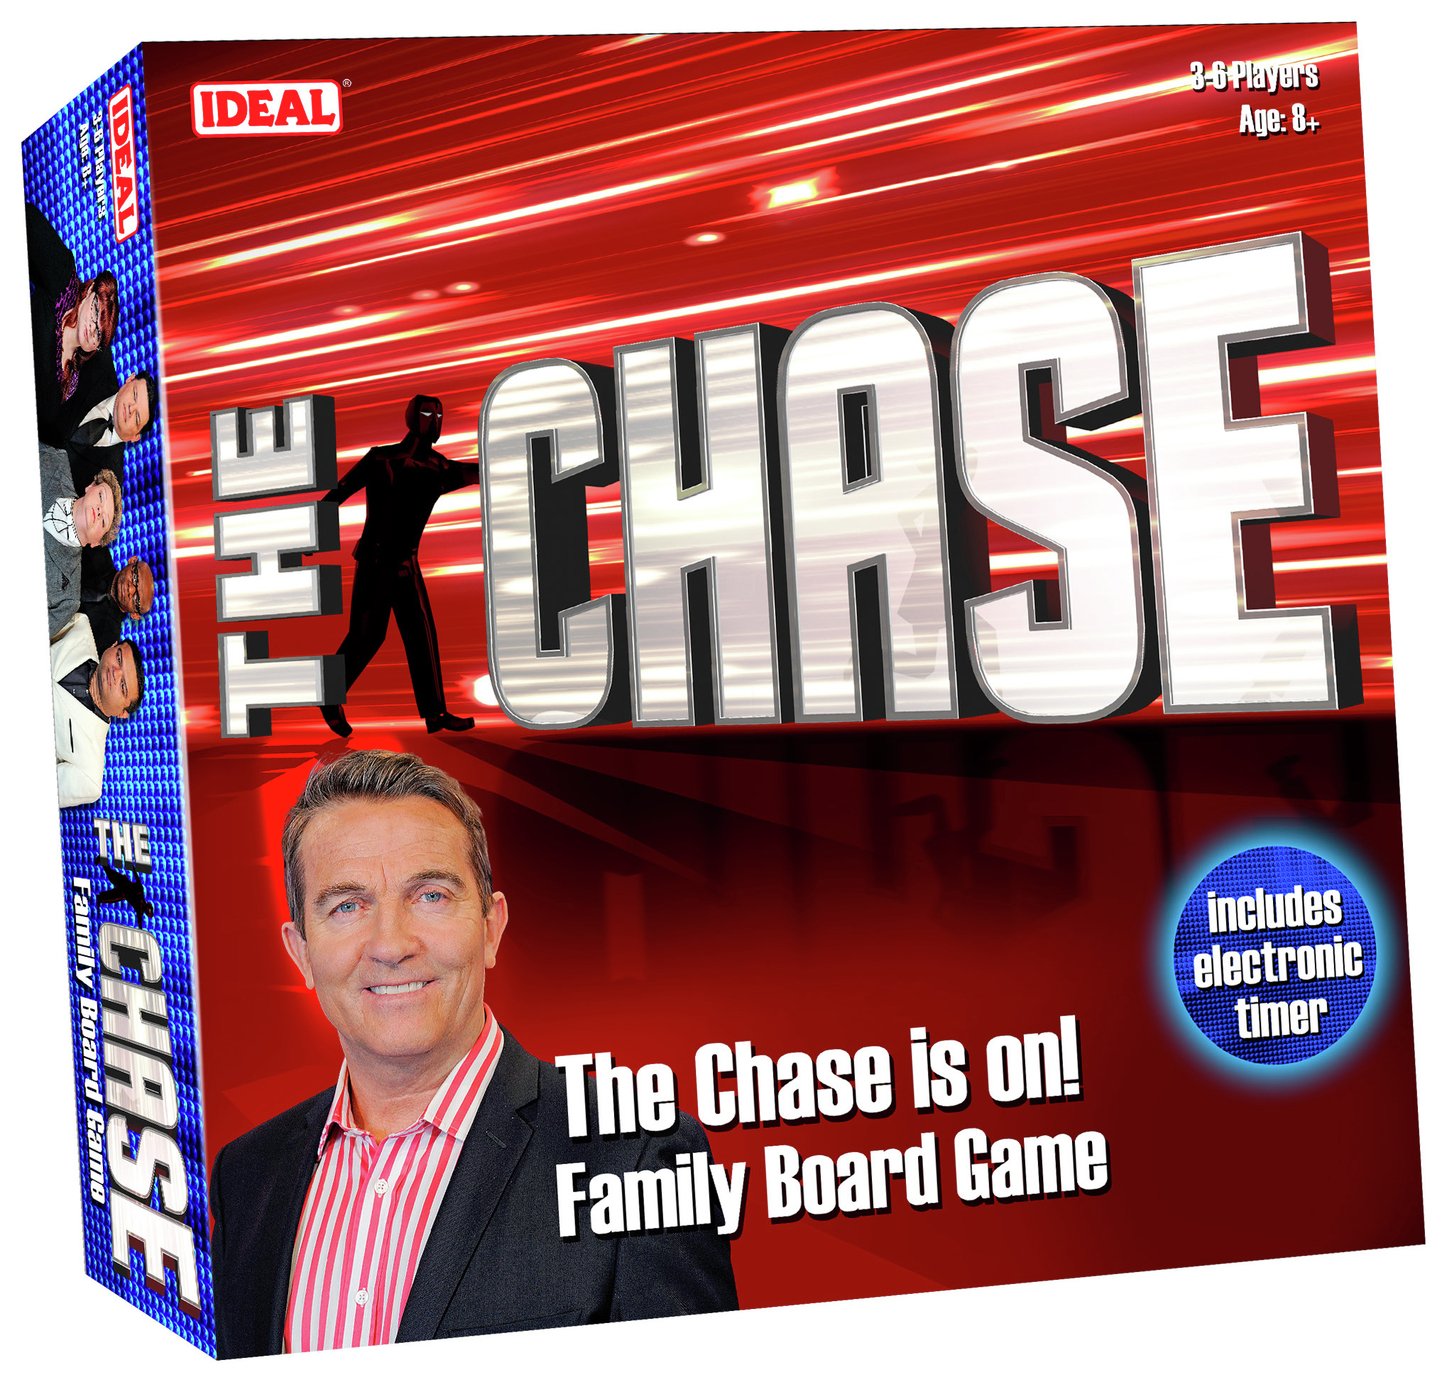 Results for the chase board game in 